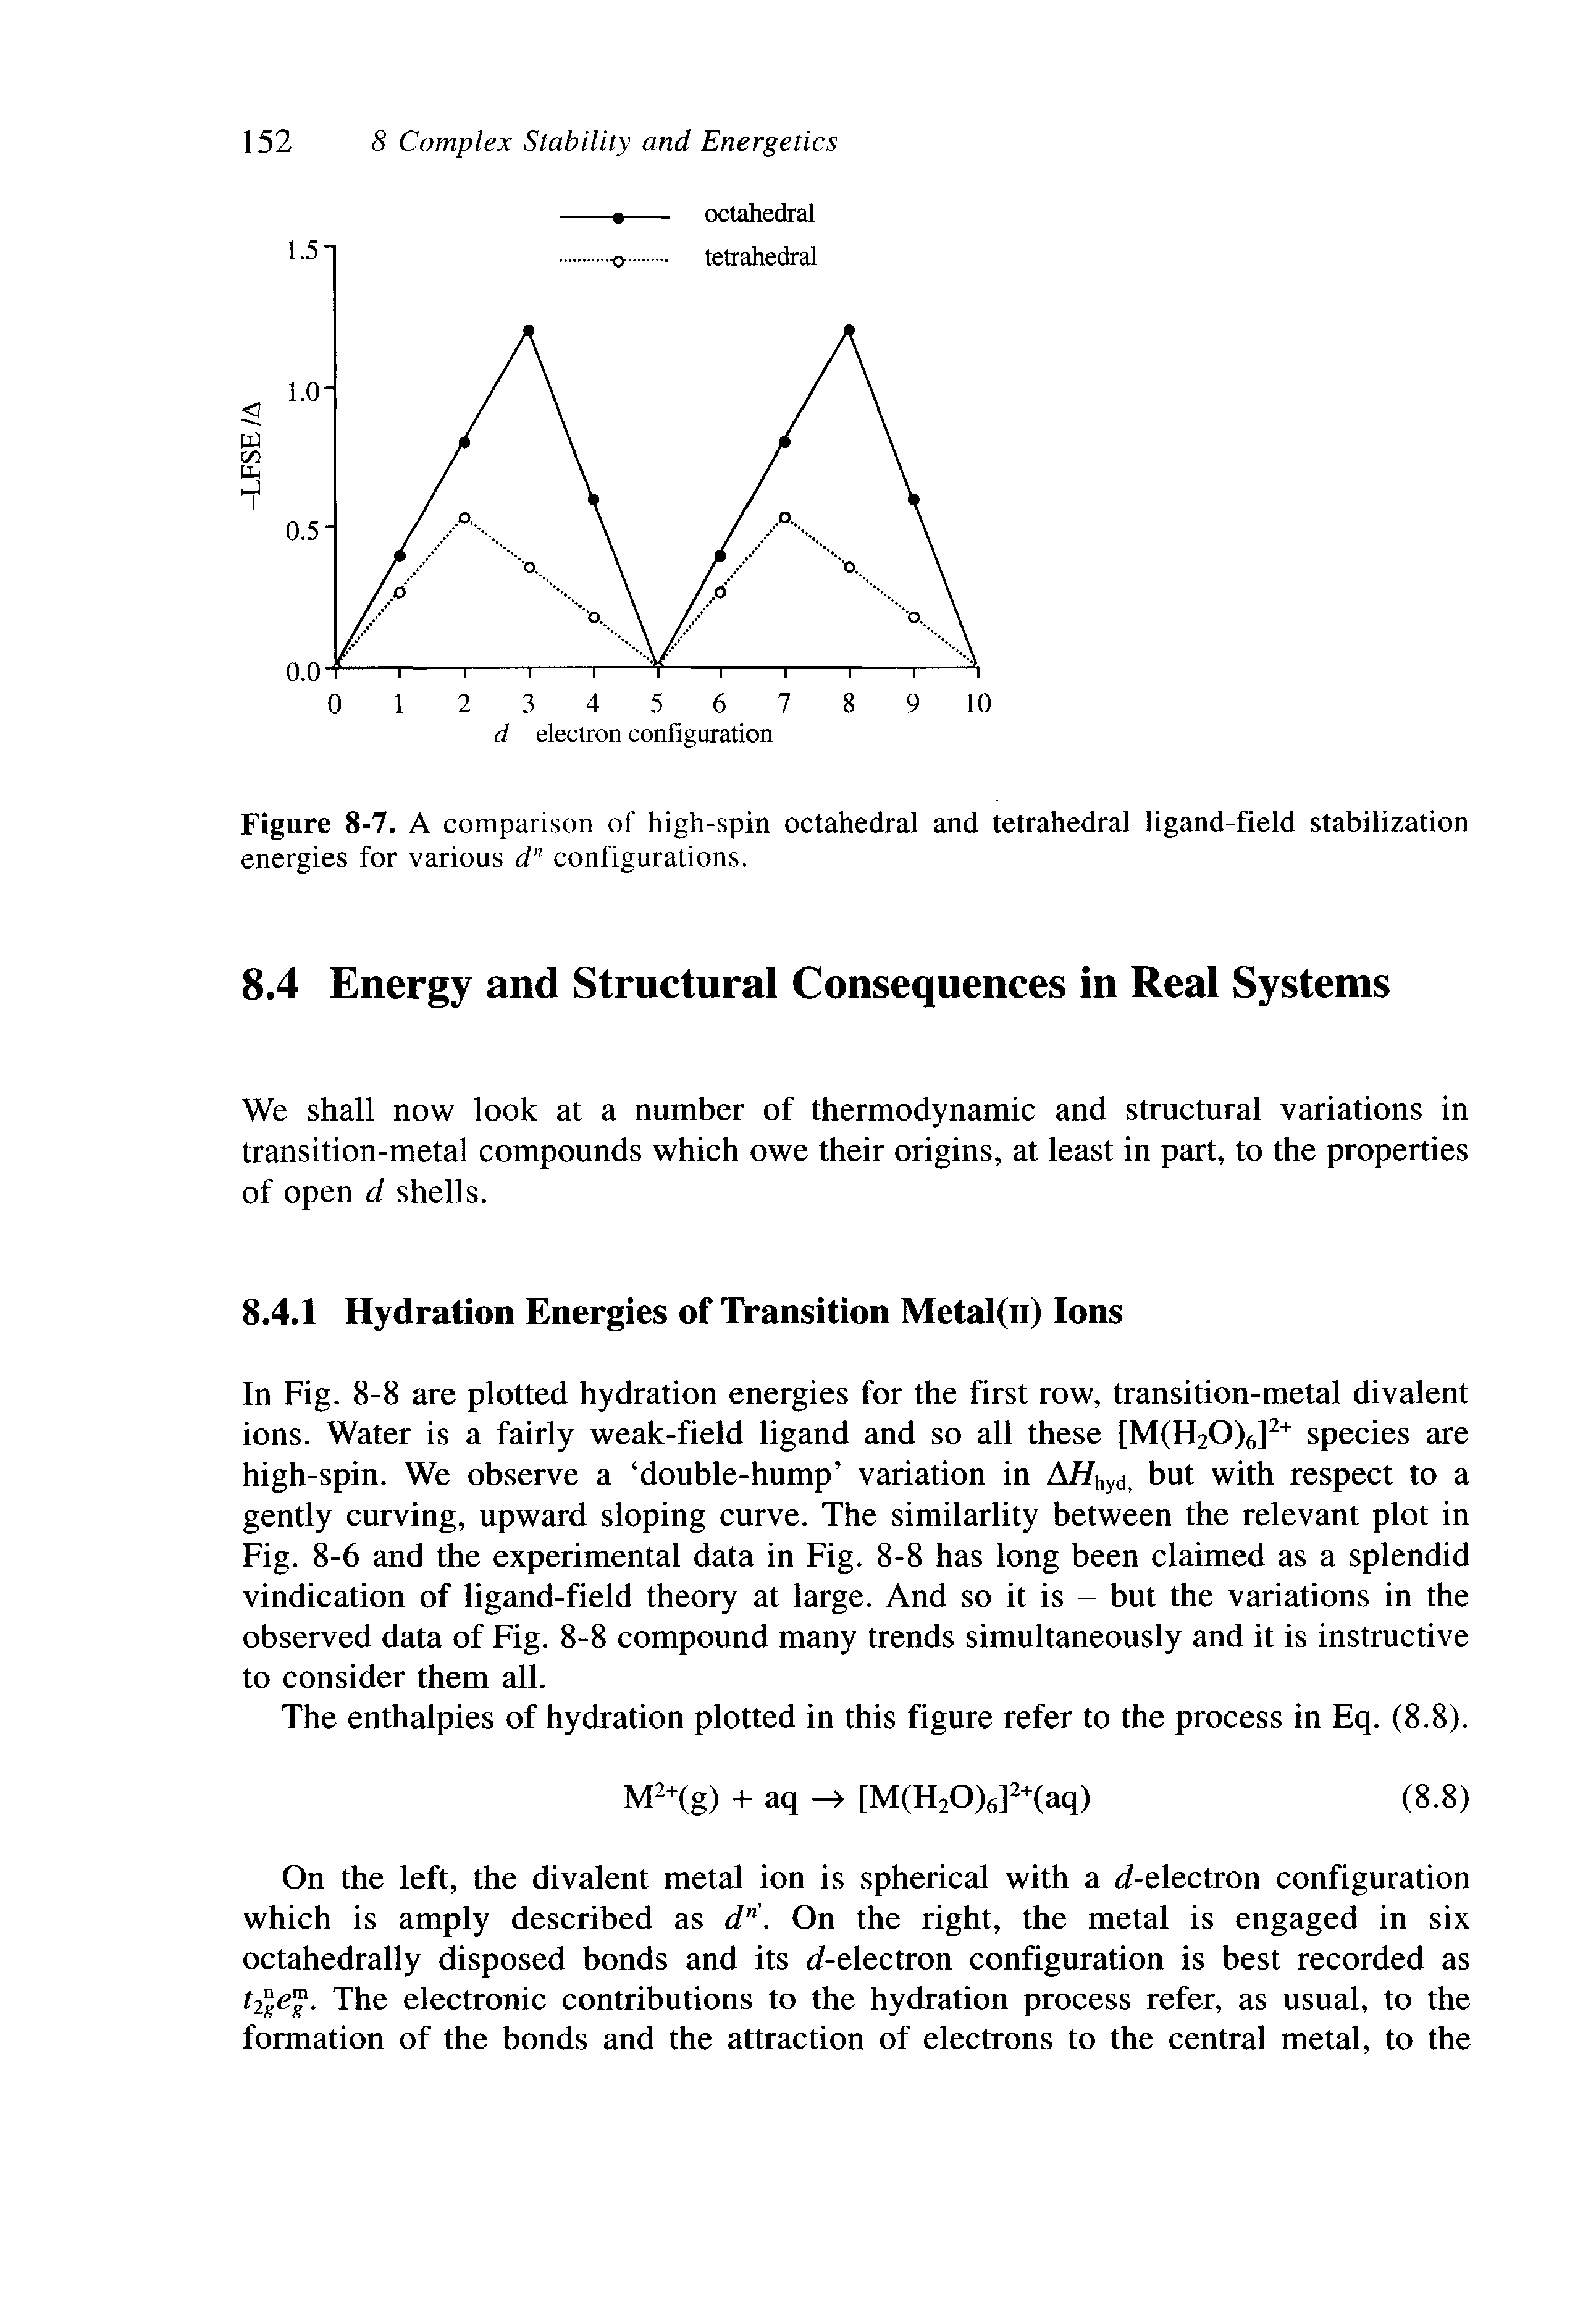 Figure 8-7. A comparison of high-spin octahedral and tetrahedral ligand-field stabilization energies for various d" configurations.